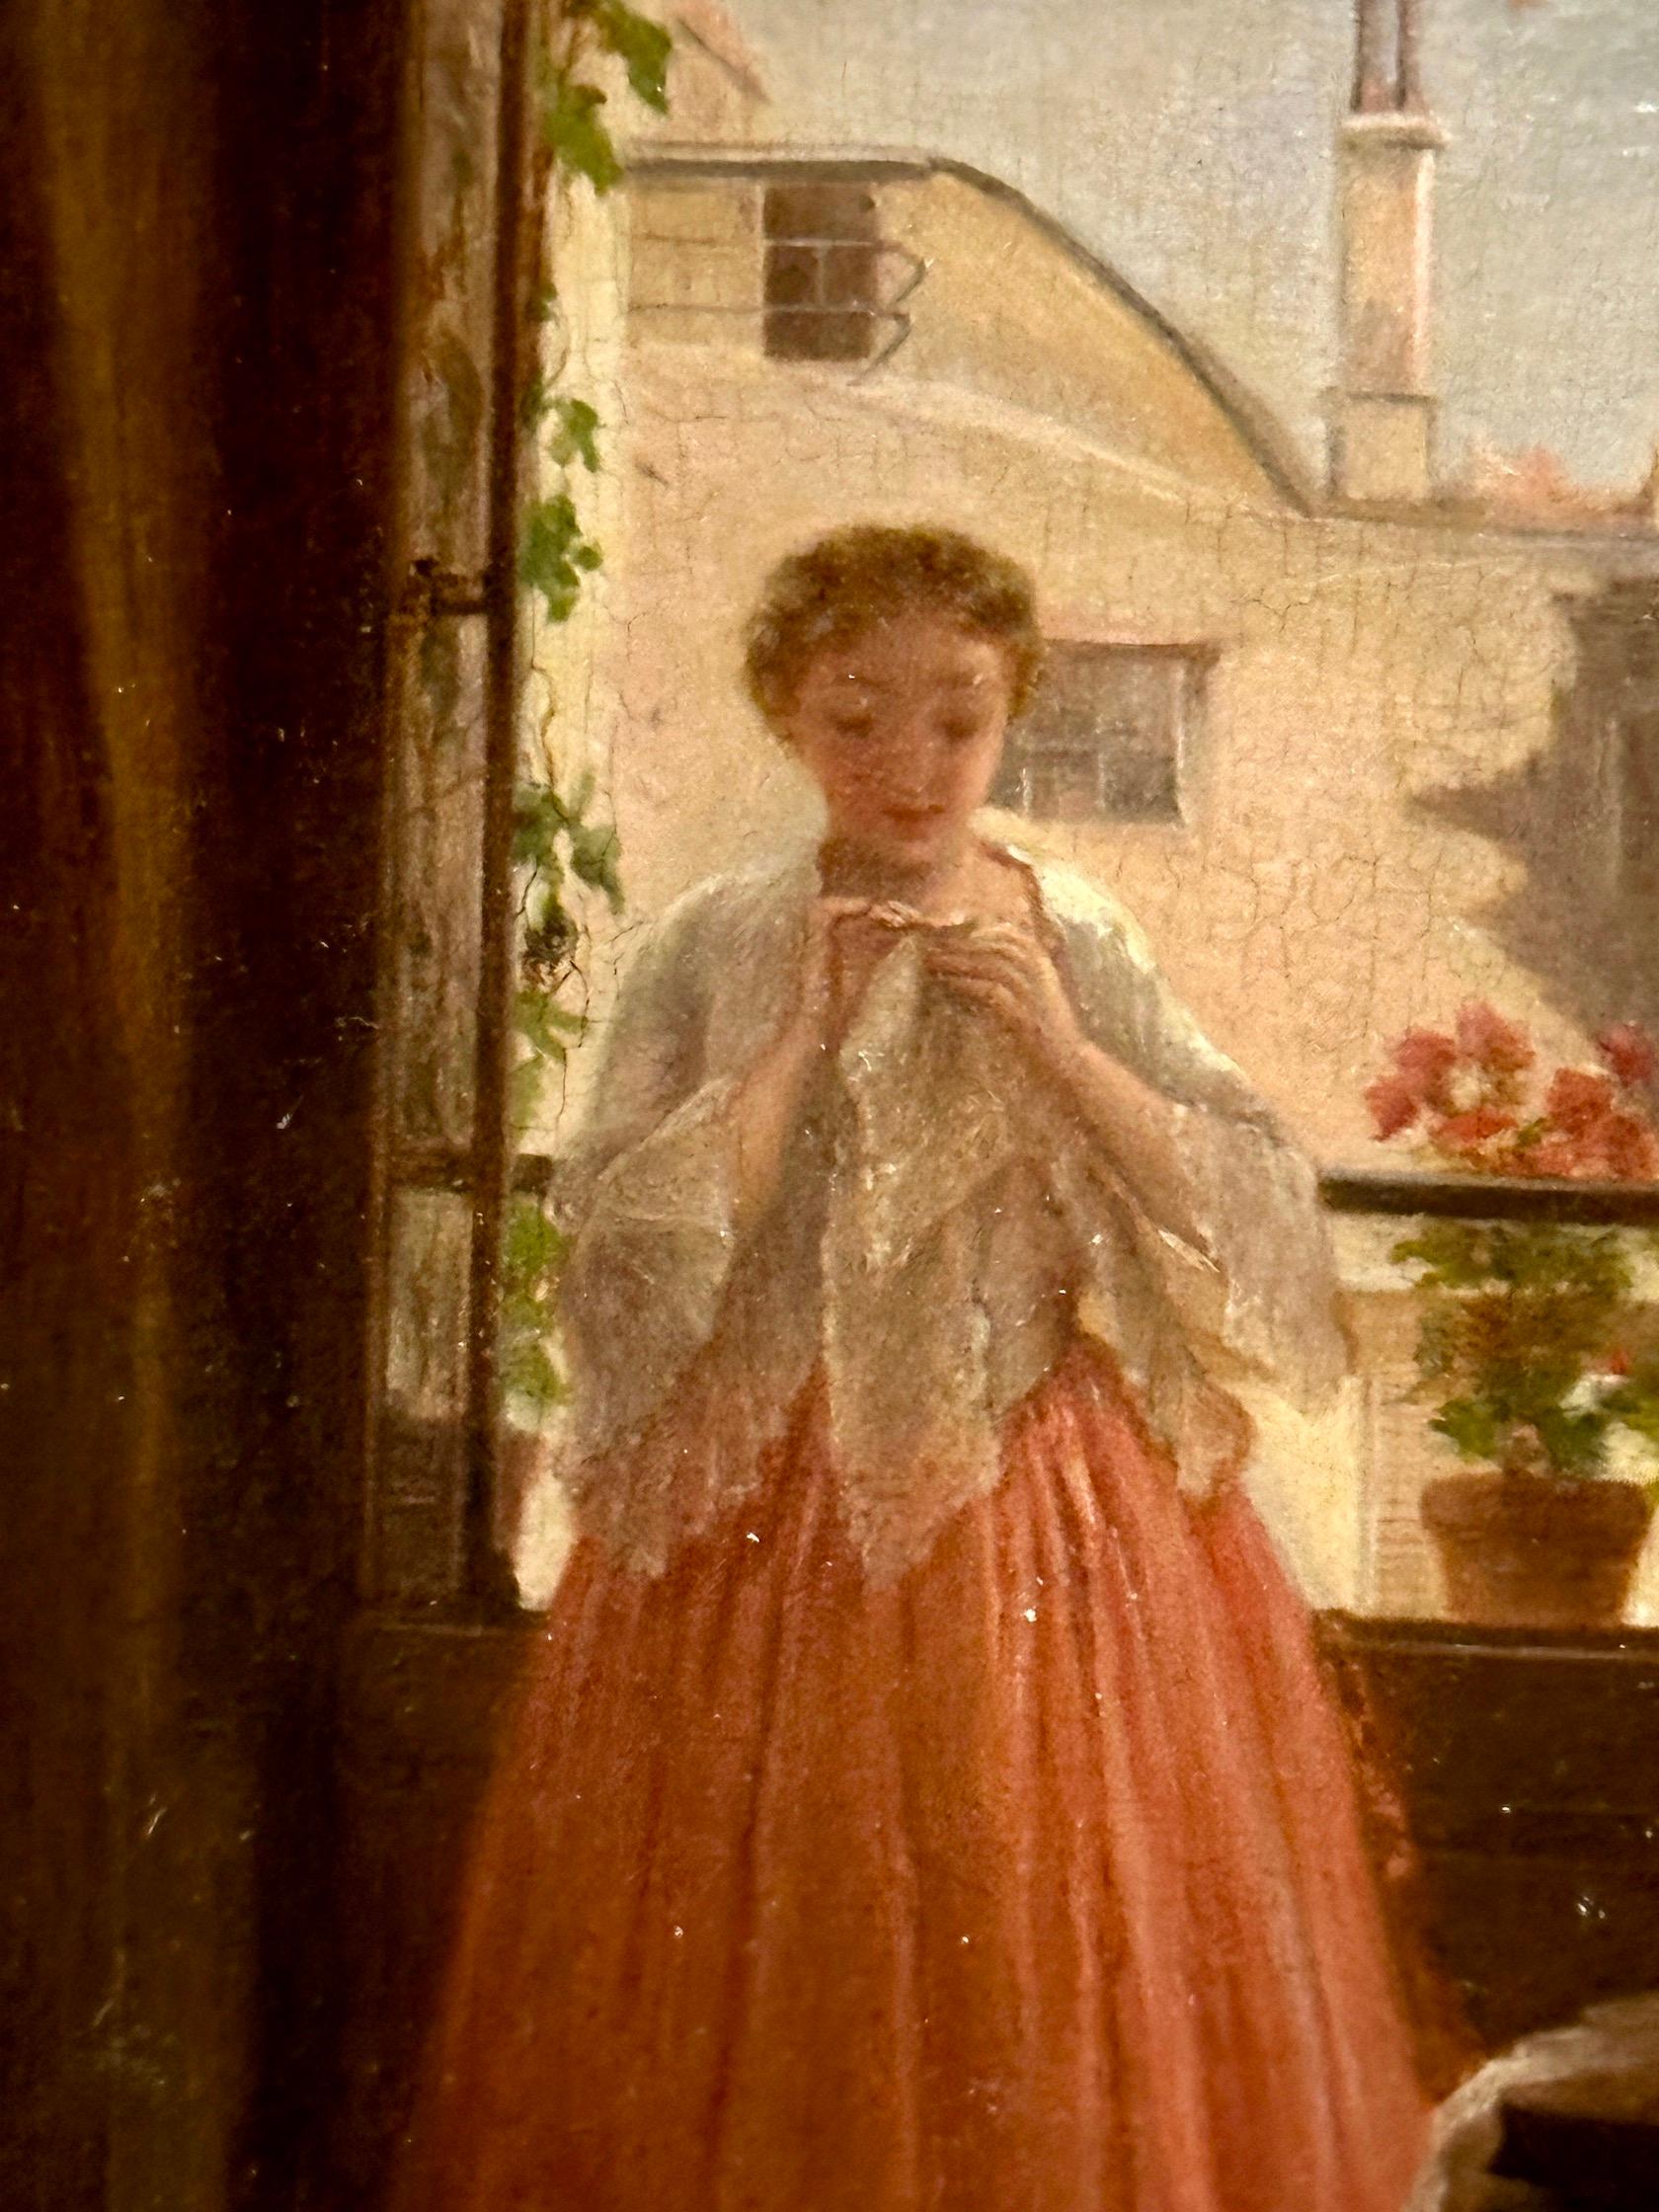 French 19th century, Lady looking at a jewel in an interior, South of France - Painting by Antoine Emile Plassan